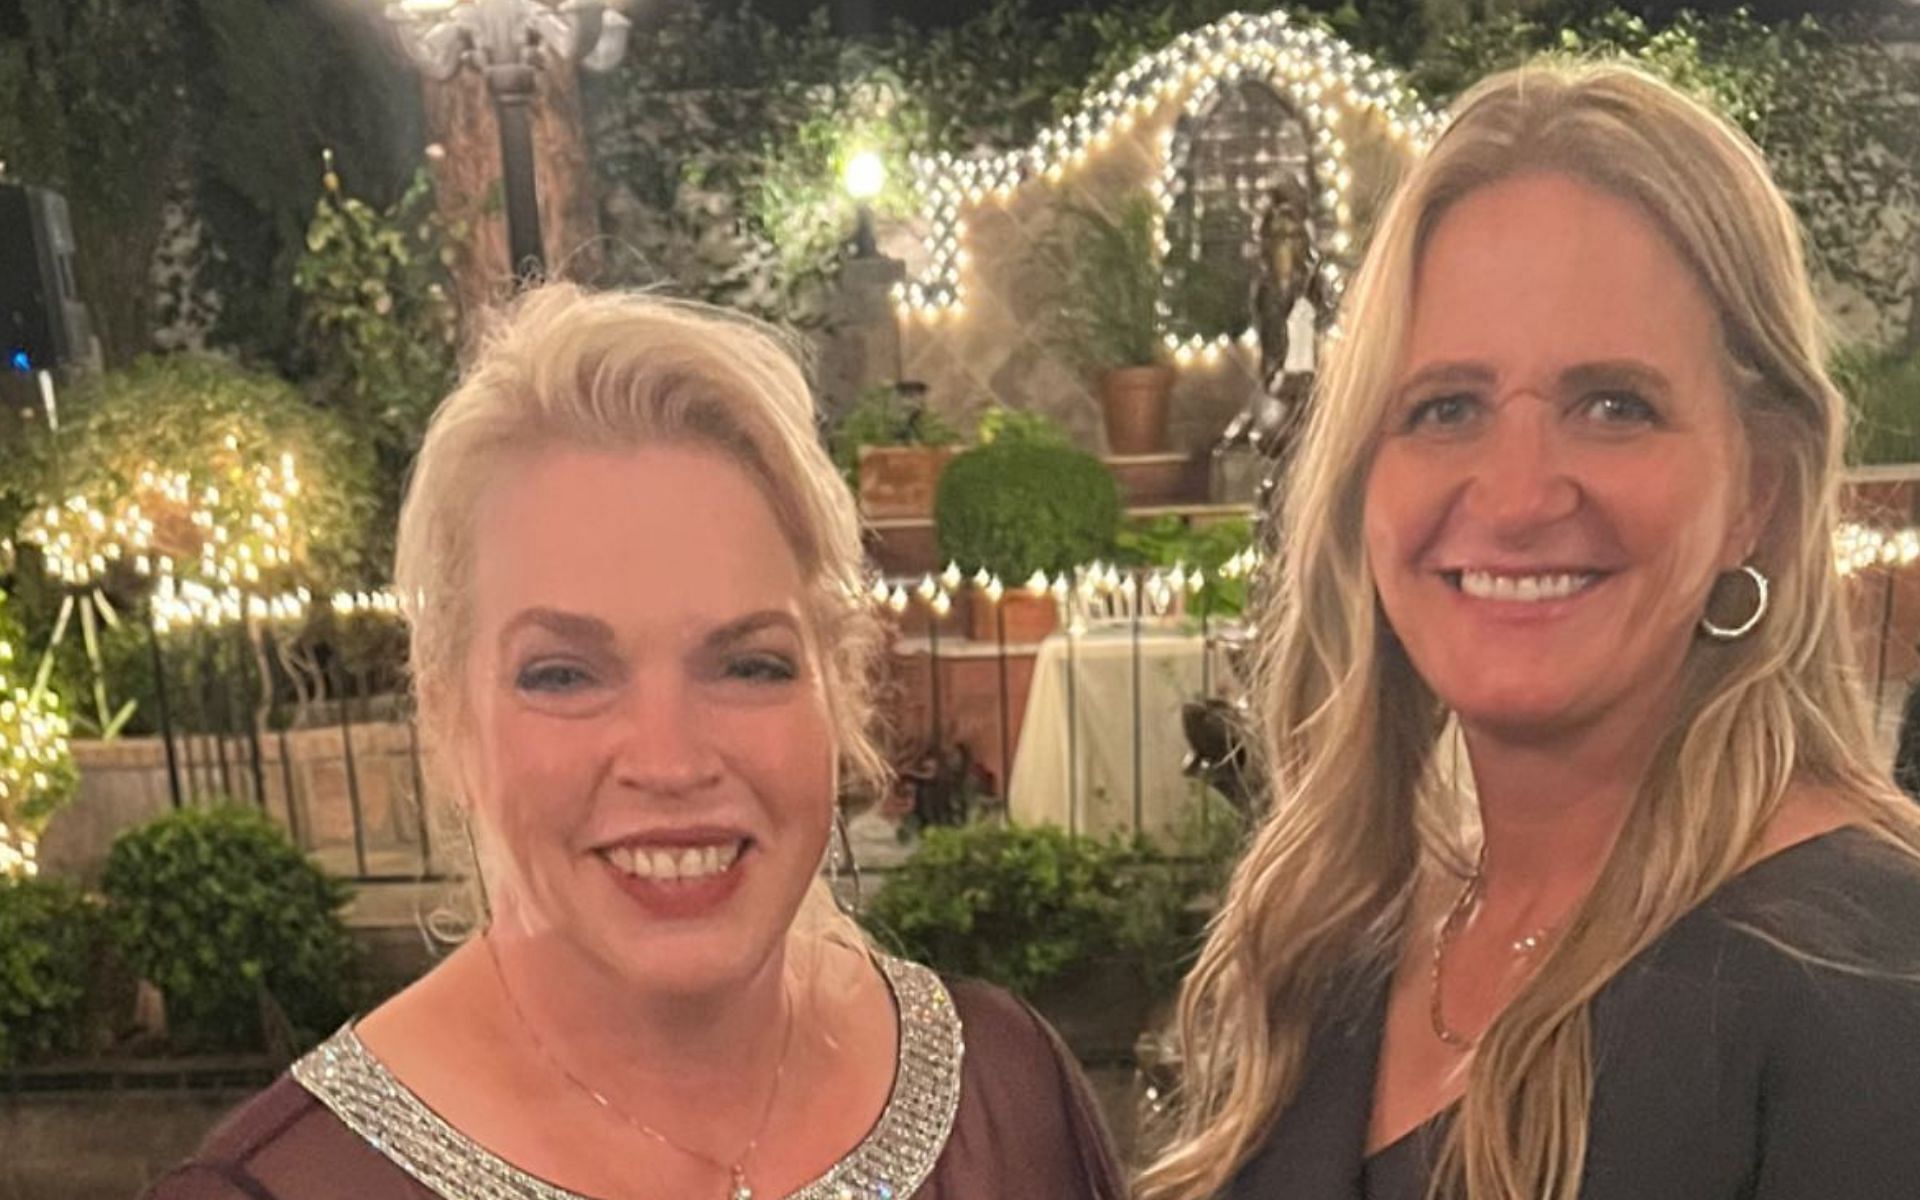 Christine and Janelle attempt to continue their friendship after Christine leaves their Sister Wives bond (Image via janellebrown117 / Instagram)